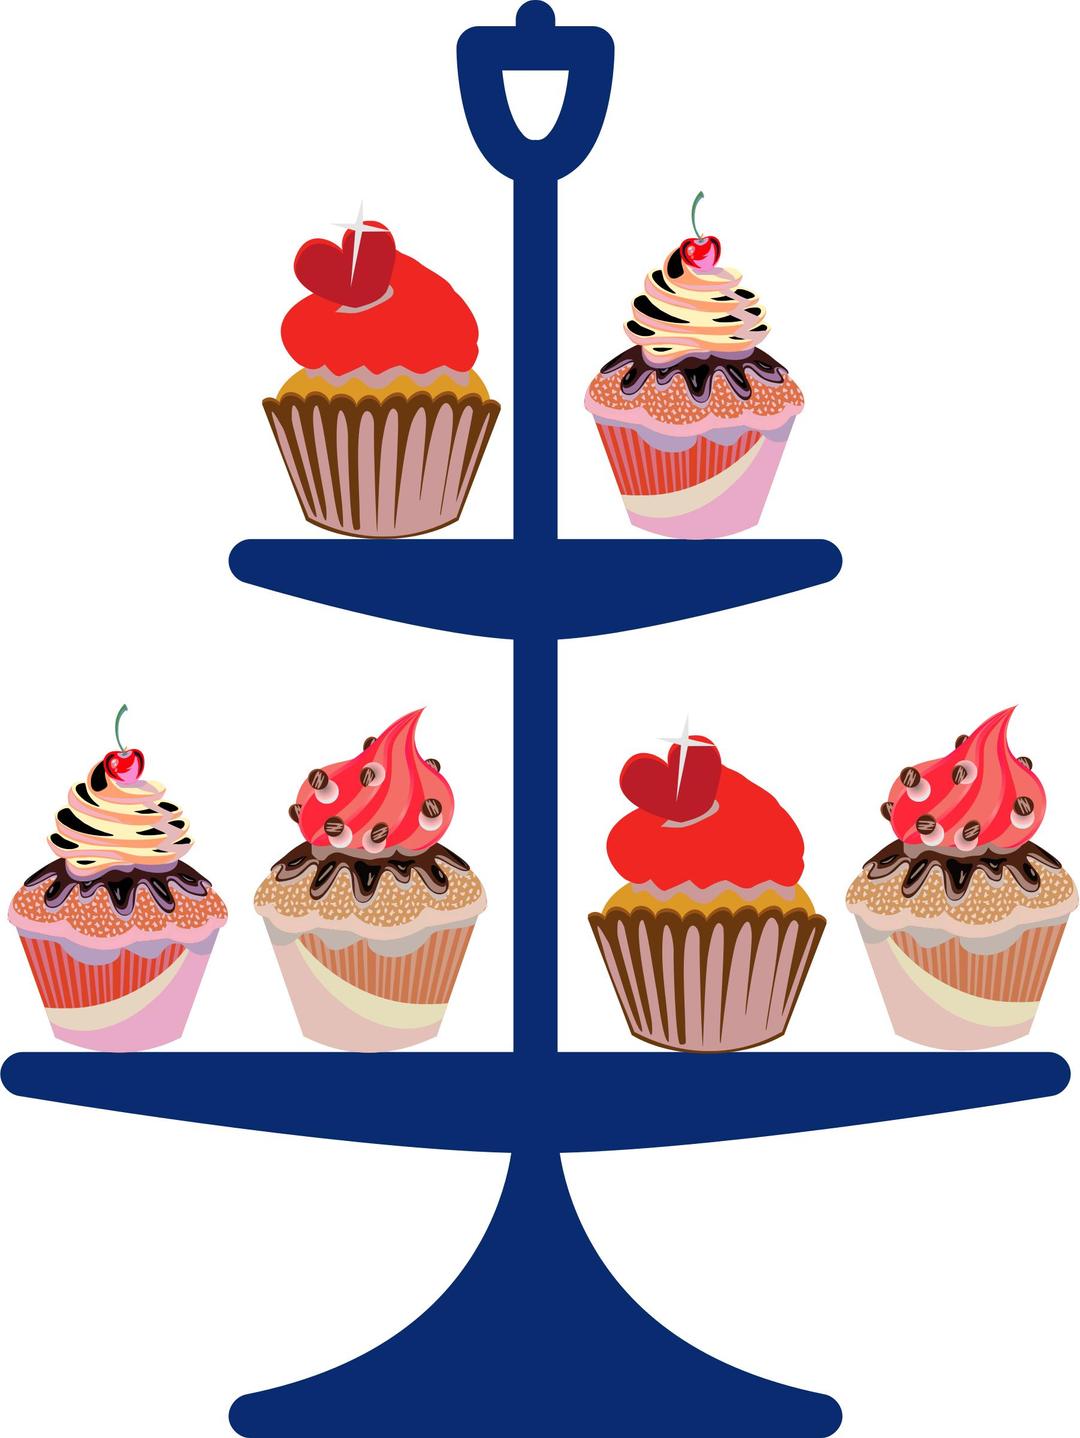 Cakes on a stand png transparent